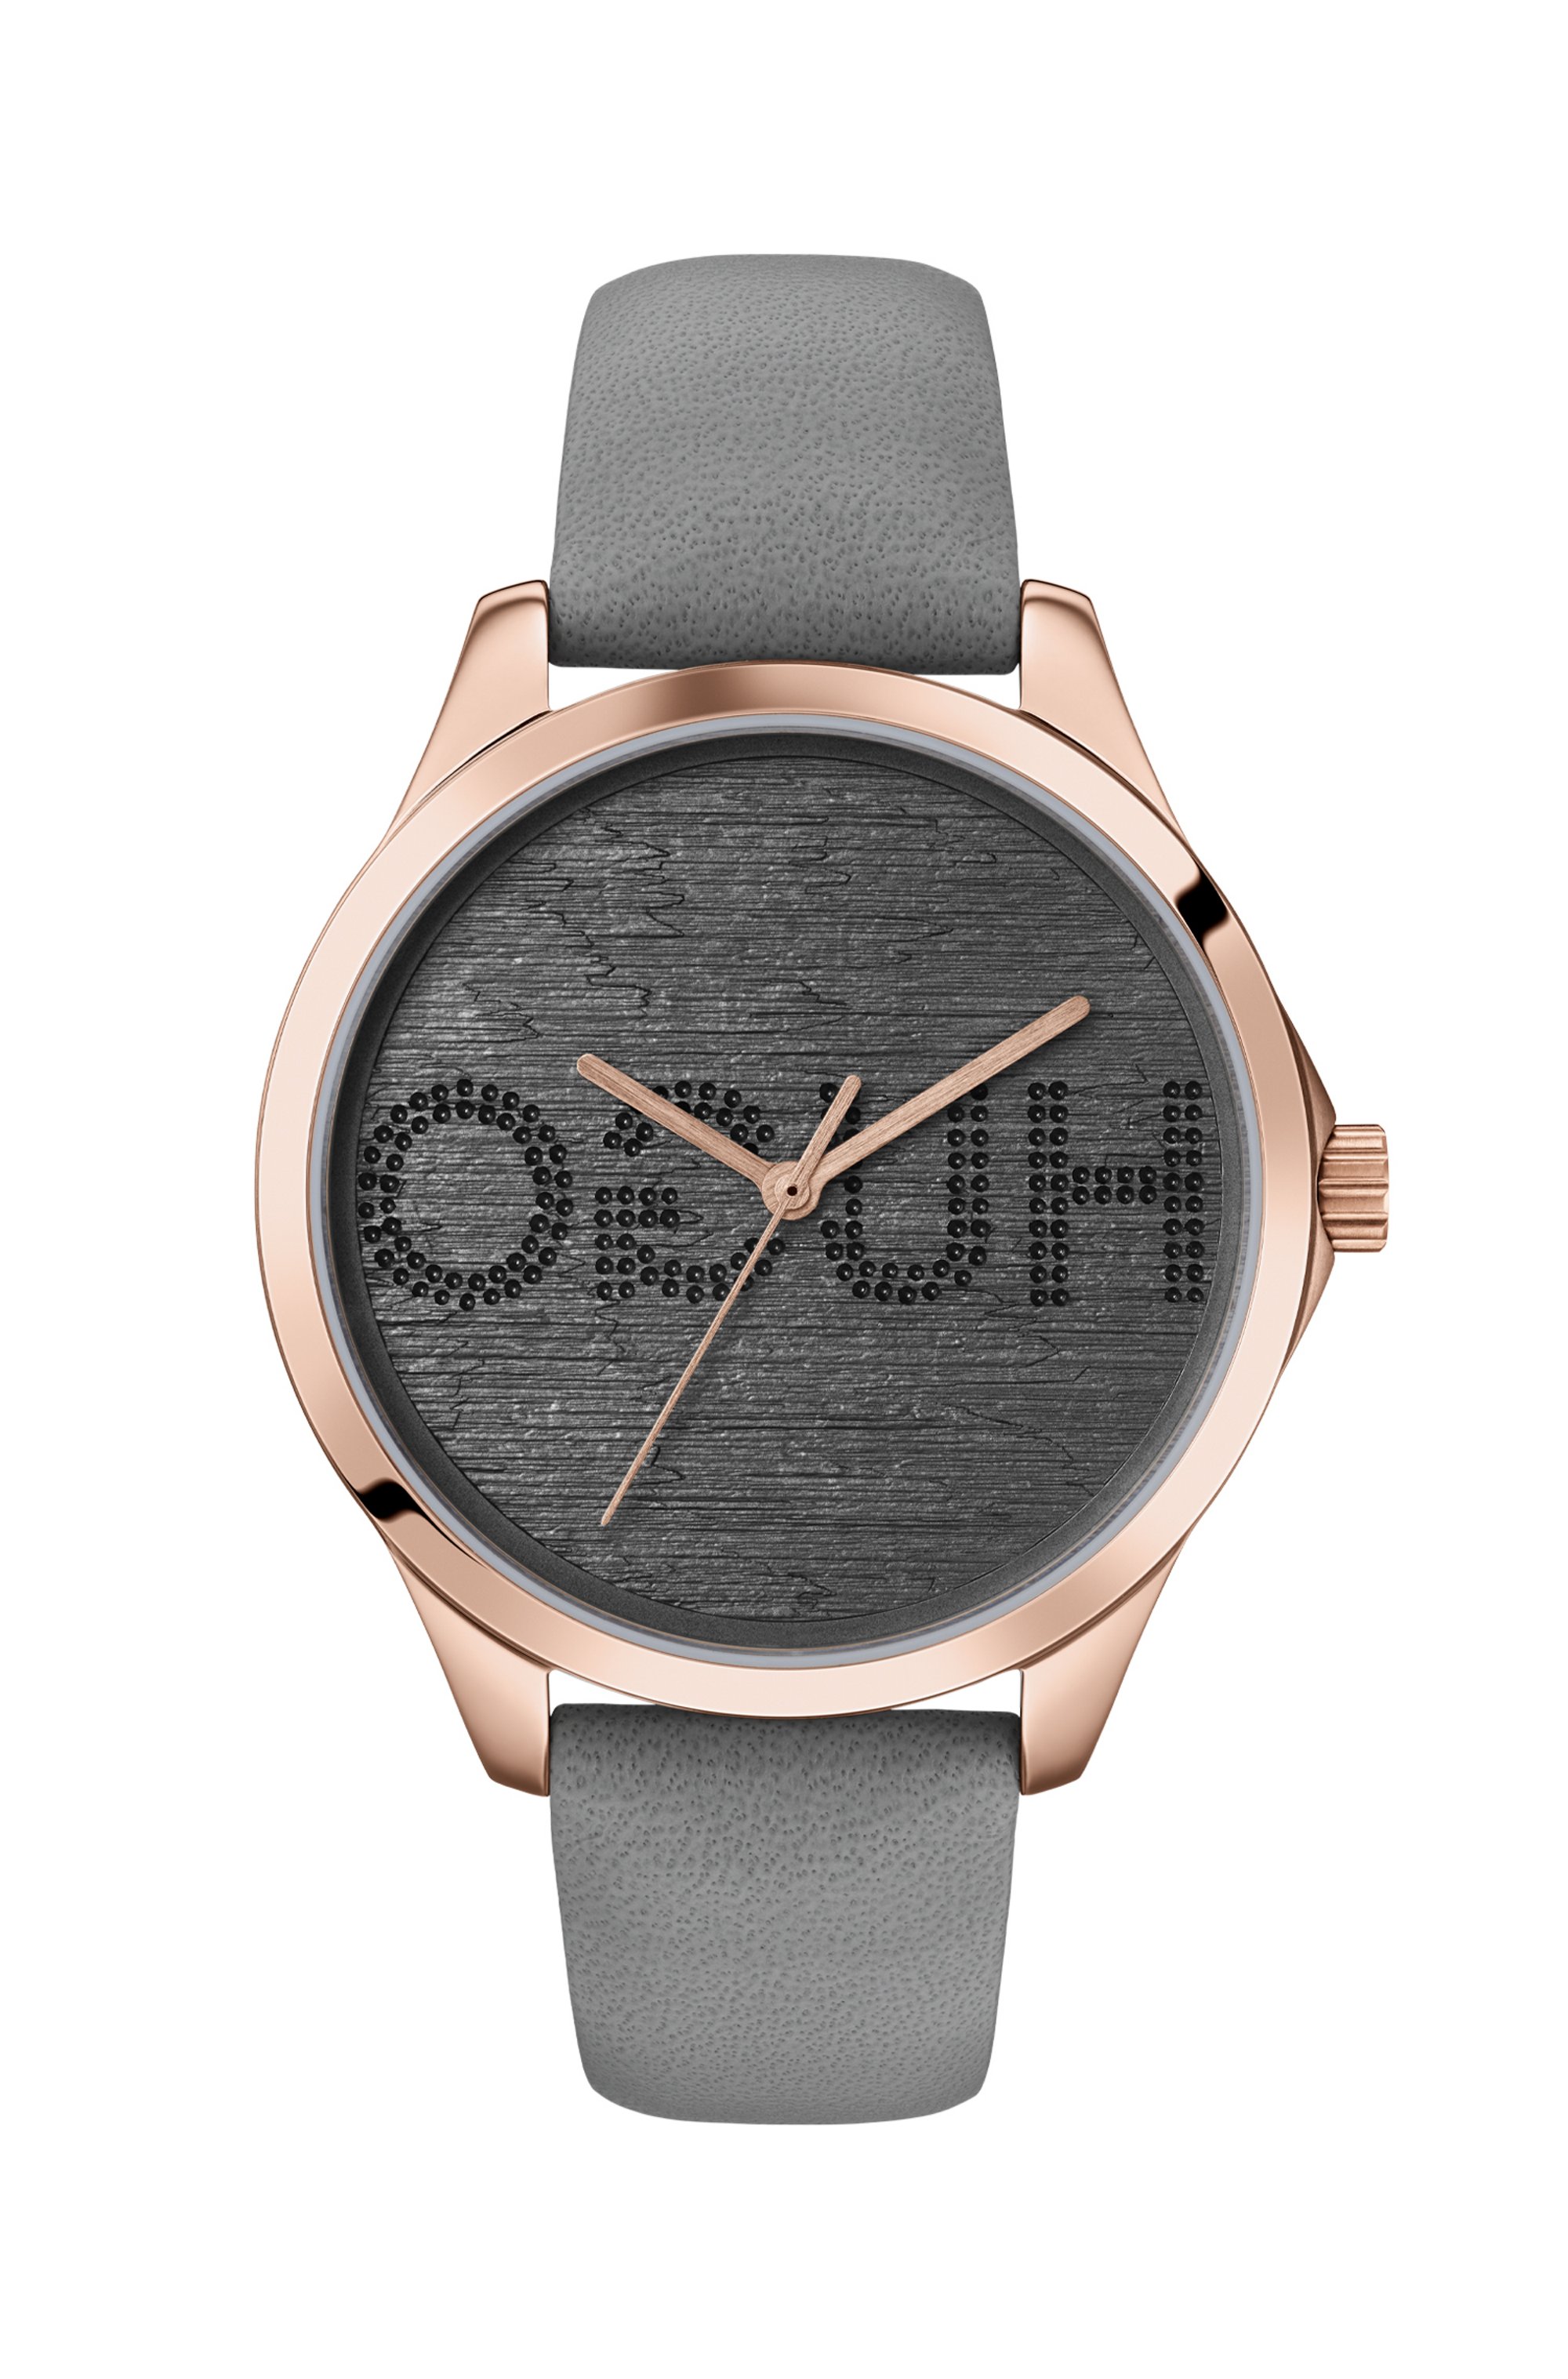 Carnation-gold-effect watch with reverse-logo dial, Grey